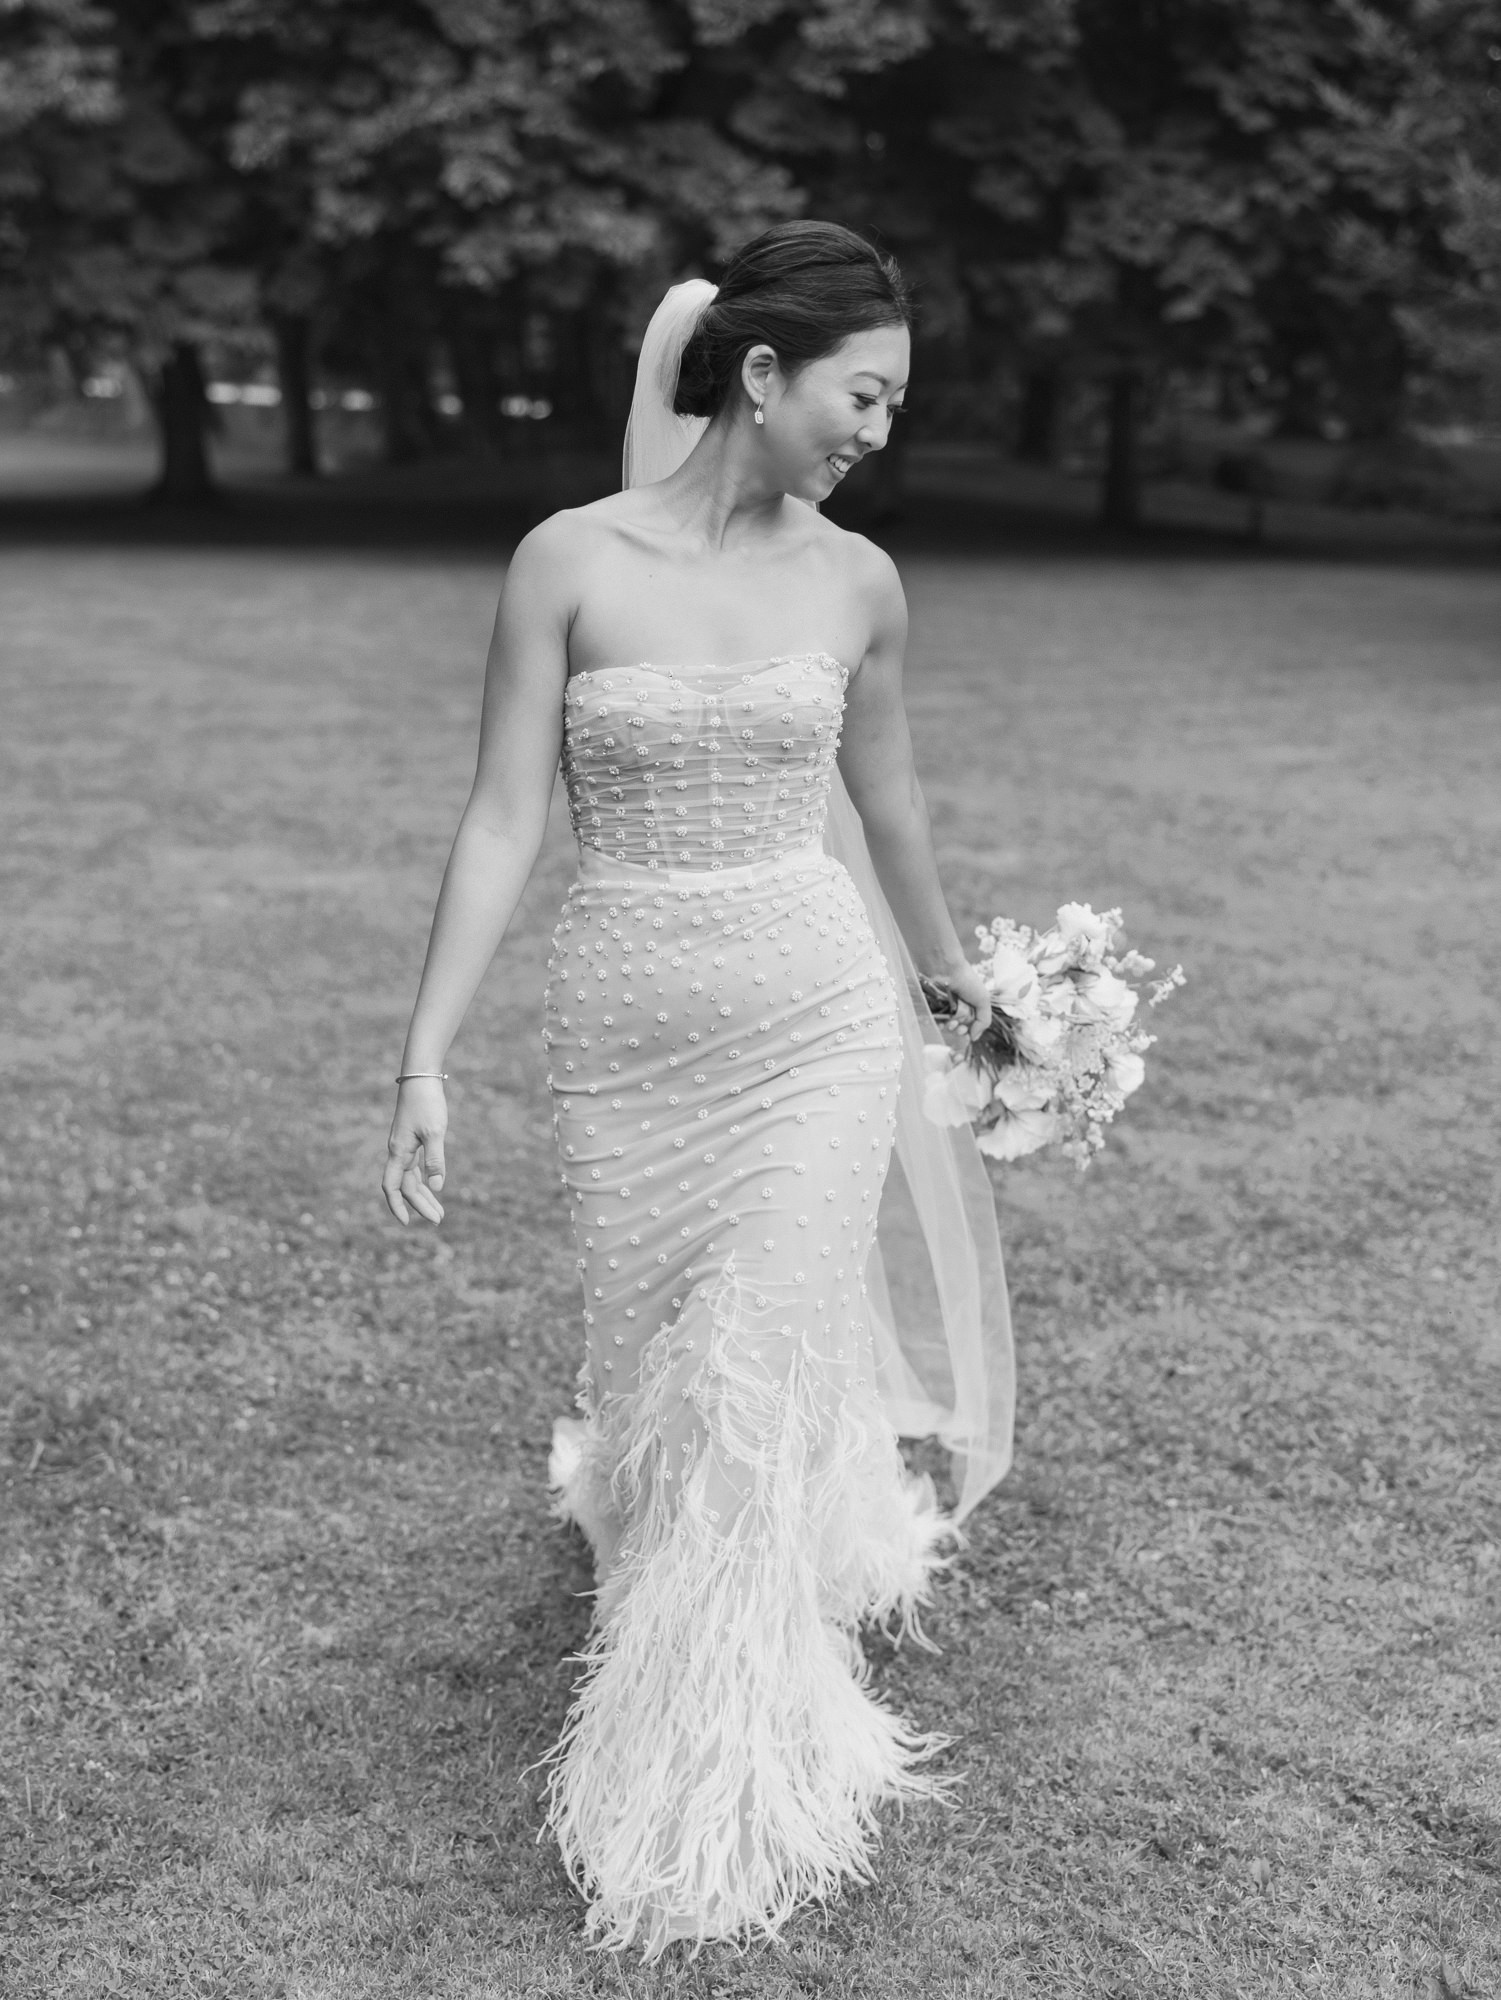 A bride in a strapless, embellished gown with a feathered skirt holds a bouquet, walking in a park, captured in black and white at Chateau Allure du Lac Loire VAlley